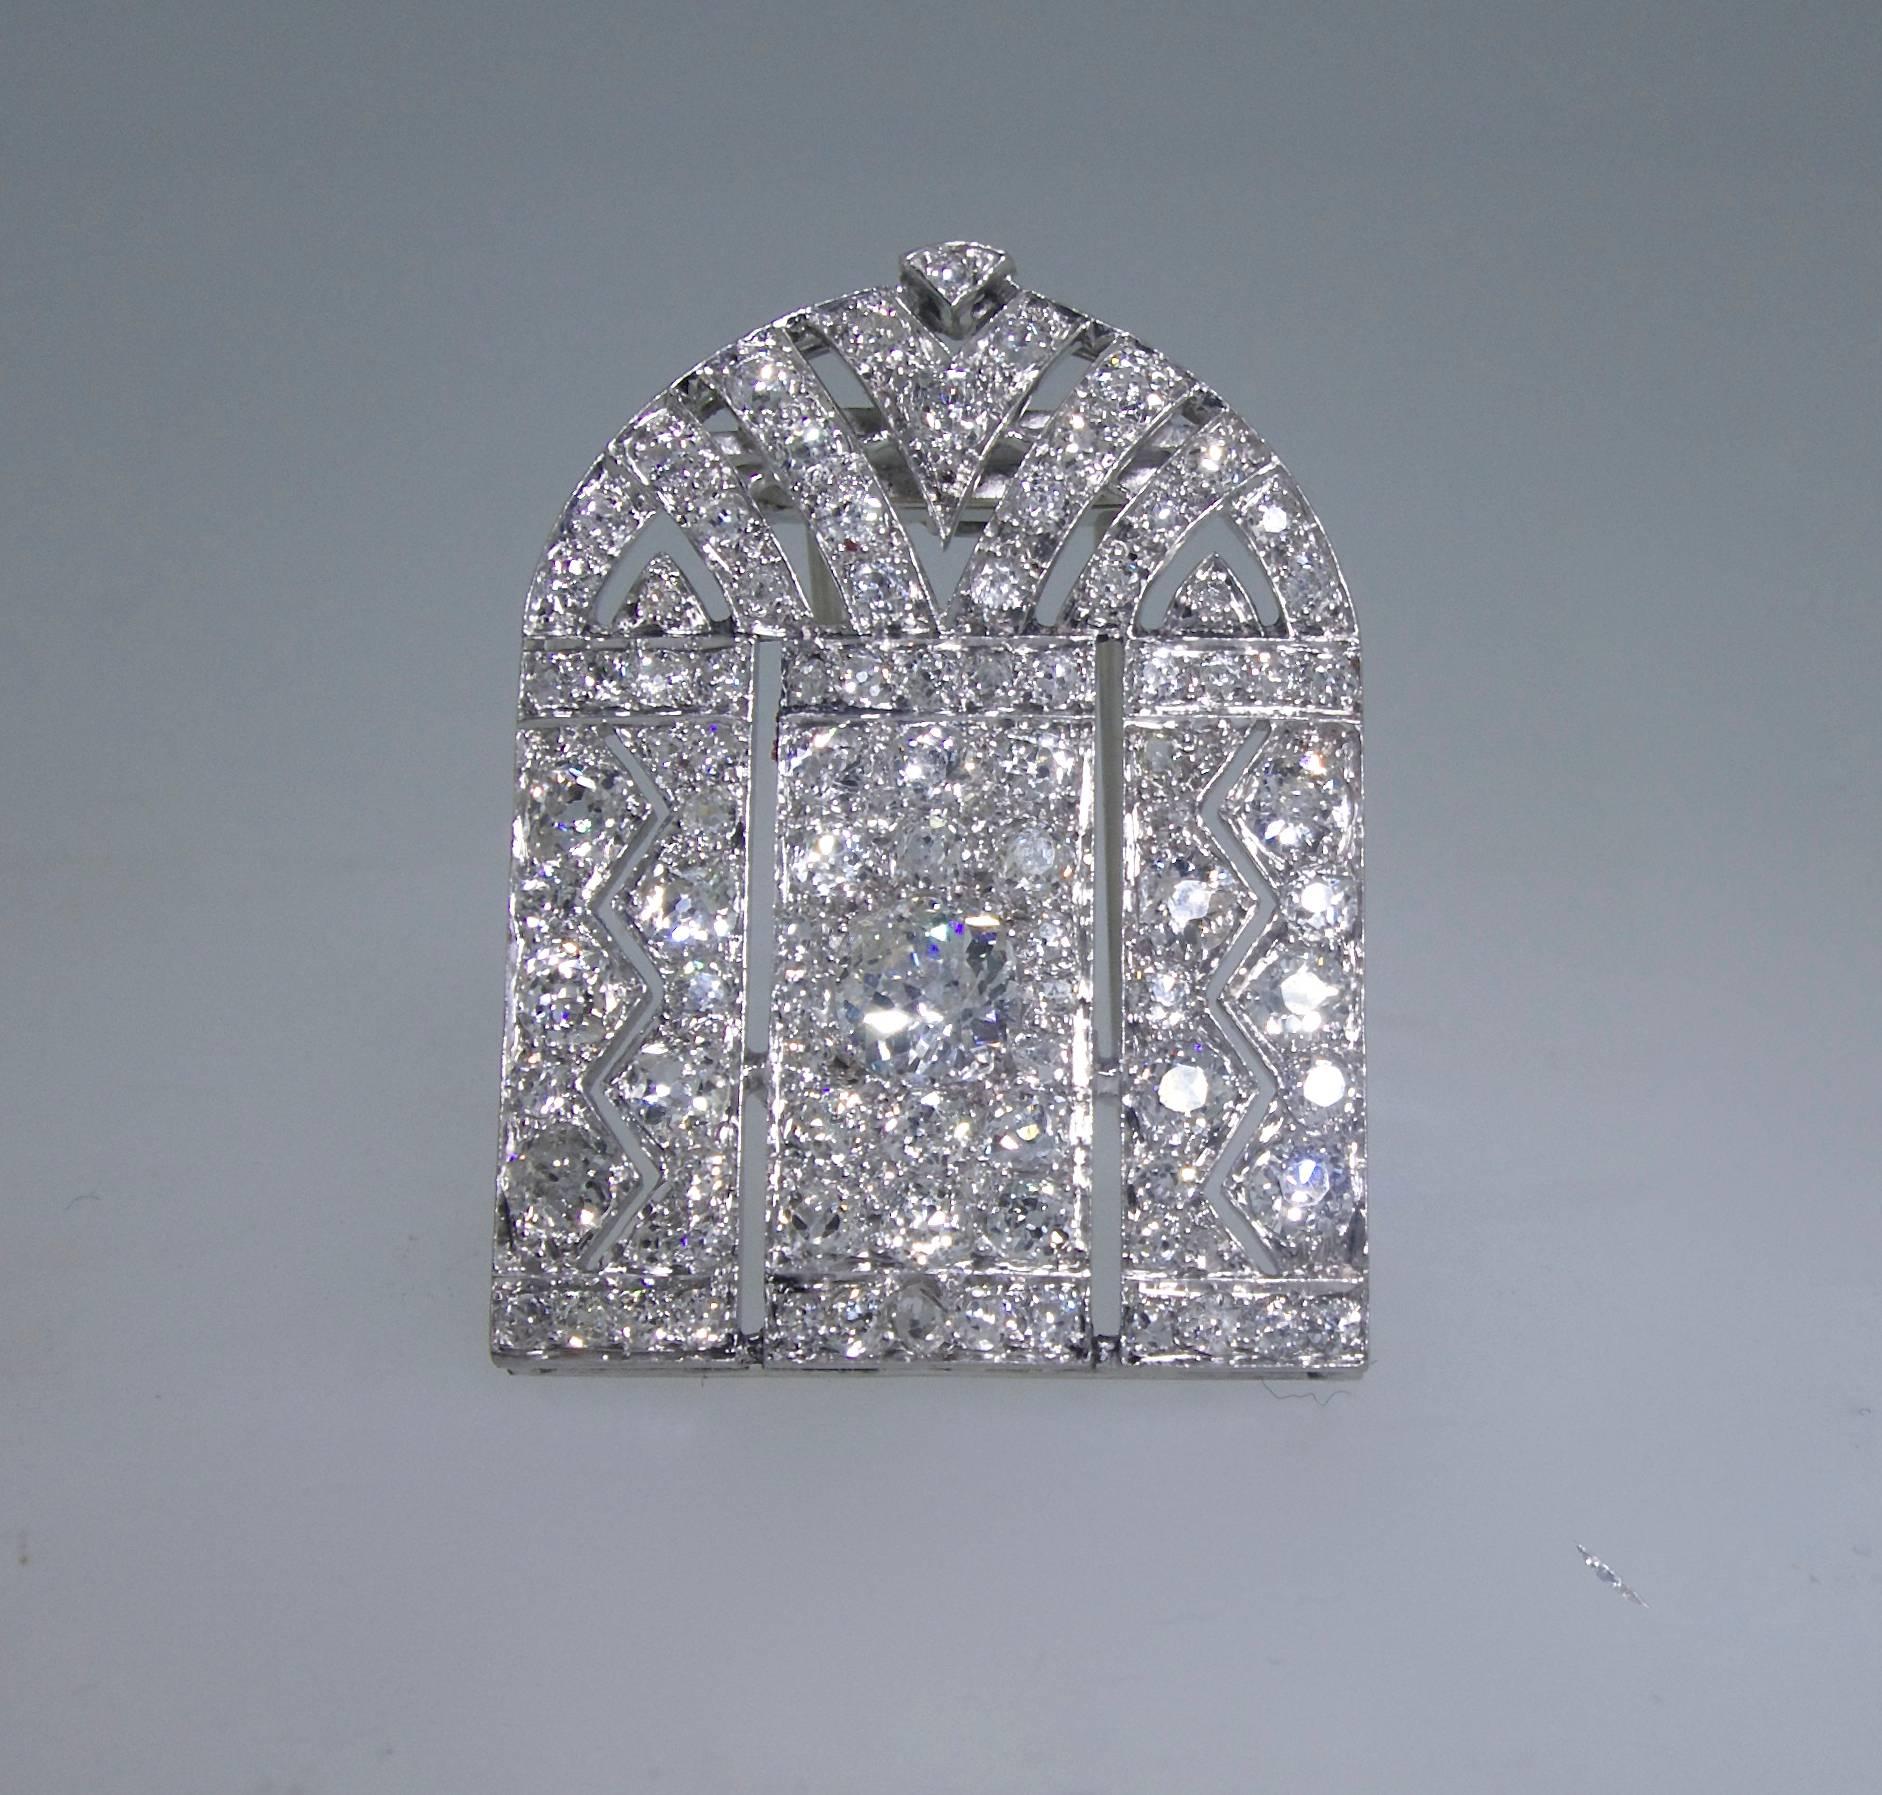 Centering a .78 ct old mine cut diamond which is surrounded in a geometric design by matching mine cut diamonds - these diamonds are bead set and near colorless and slightly included.  There are approximately 4.5 cts. totally of diamonds.  The